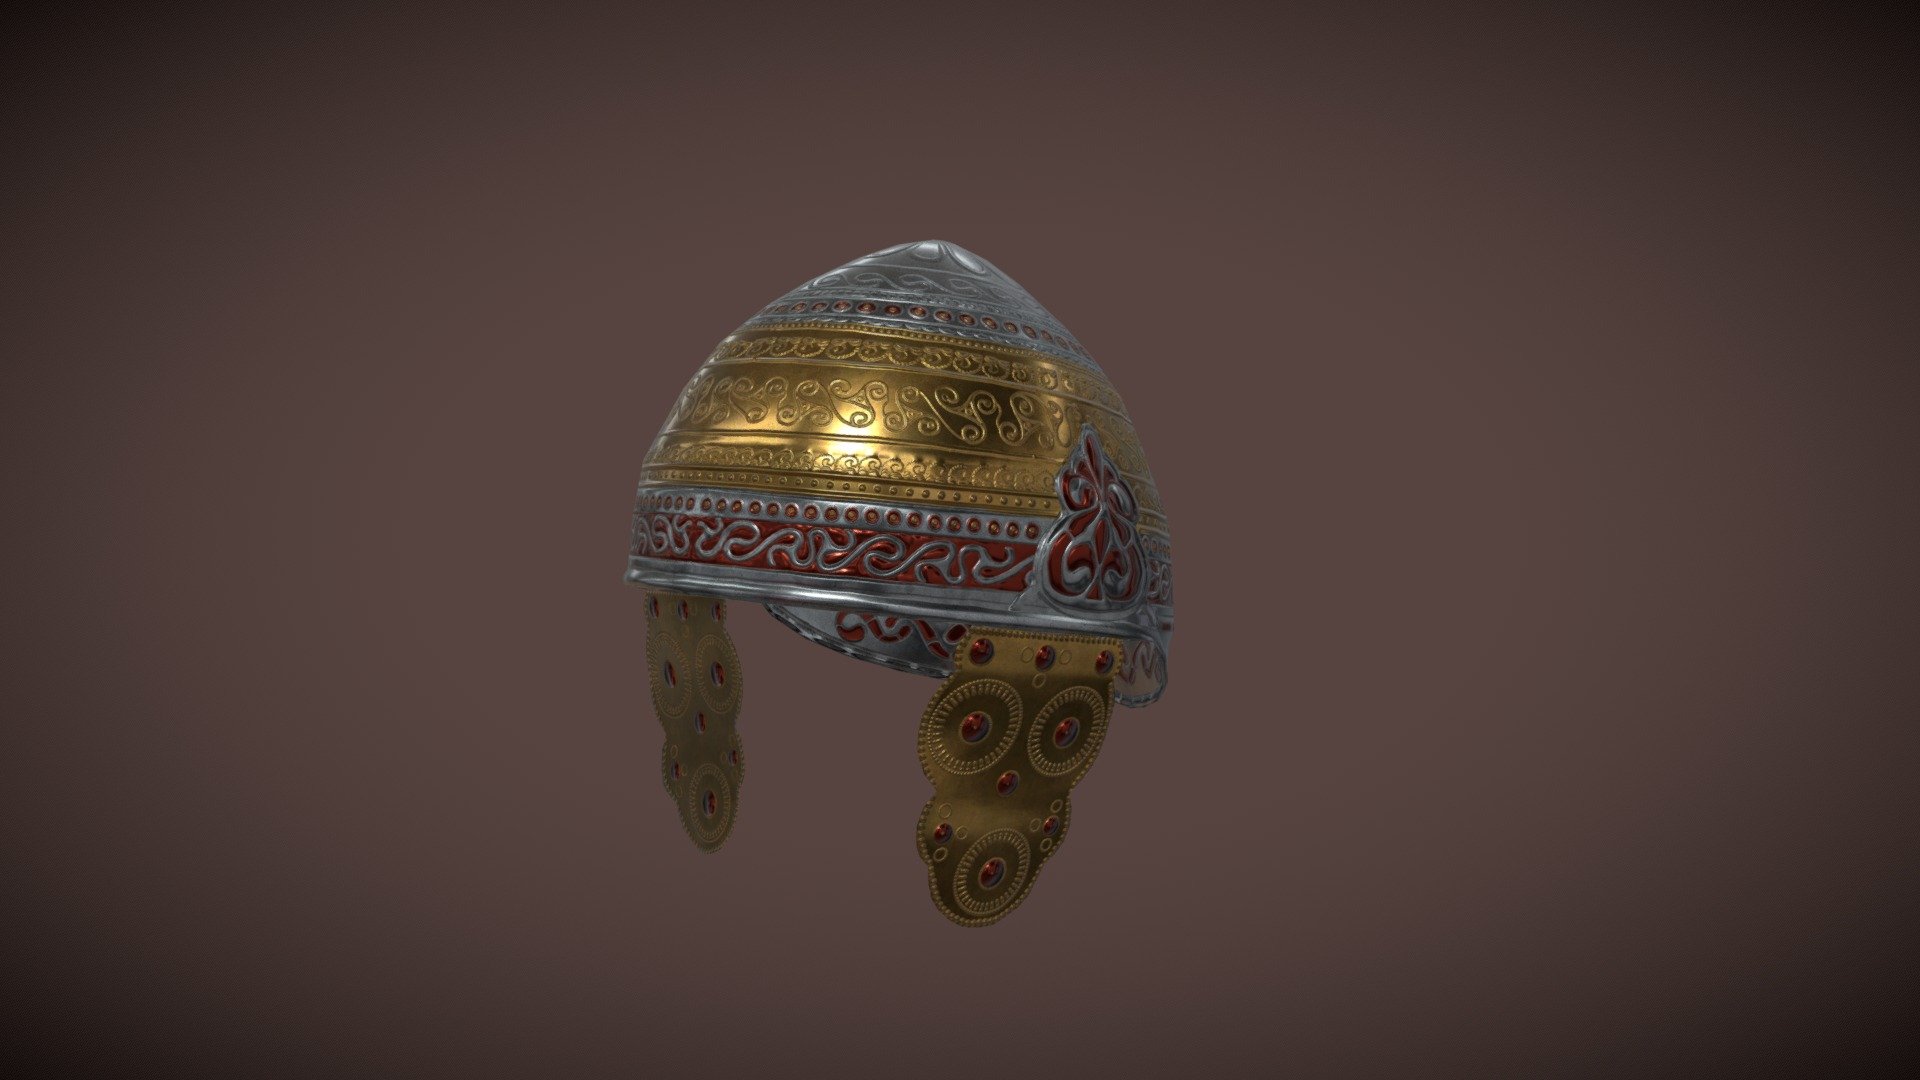 Amfreville (Eure, France), the helmet is made in bronze, covered of metal sheets made out of bronze, iron and gold. Red enamel is also applied to enhance the pattern and give it more colours.

Made for the RIR: Imperium Surrectum mod, for the game Rome Total War Remastered.

Made in Blender - 910 vertices

The creative process consists of modelling the low-poly version, followed by high poly version through the use of the Multi-Res modifier. Any details that the piece might present are sculpted on this copy, after which, they are baked into its low poly counterpart. The goal here is to avoid modelling the additional detail - which would increase the vert count - while still maintaining the illusion that the helmet contains such details 3d model